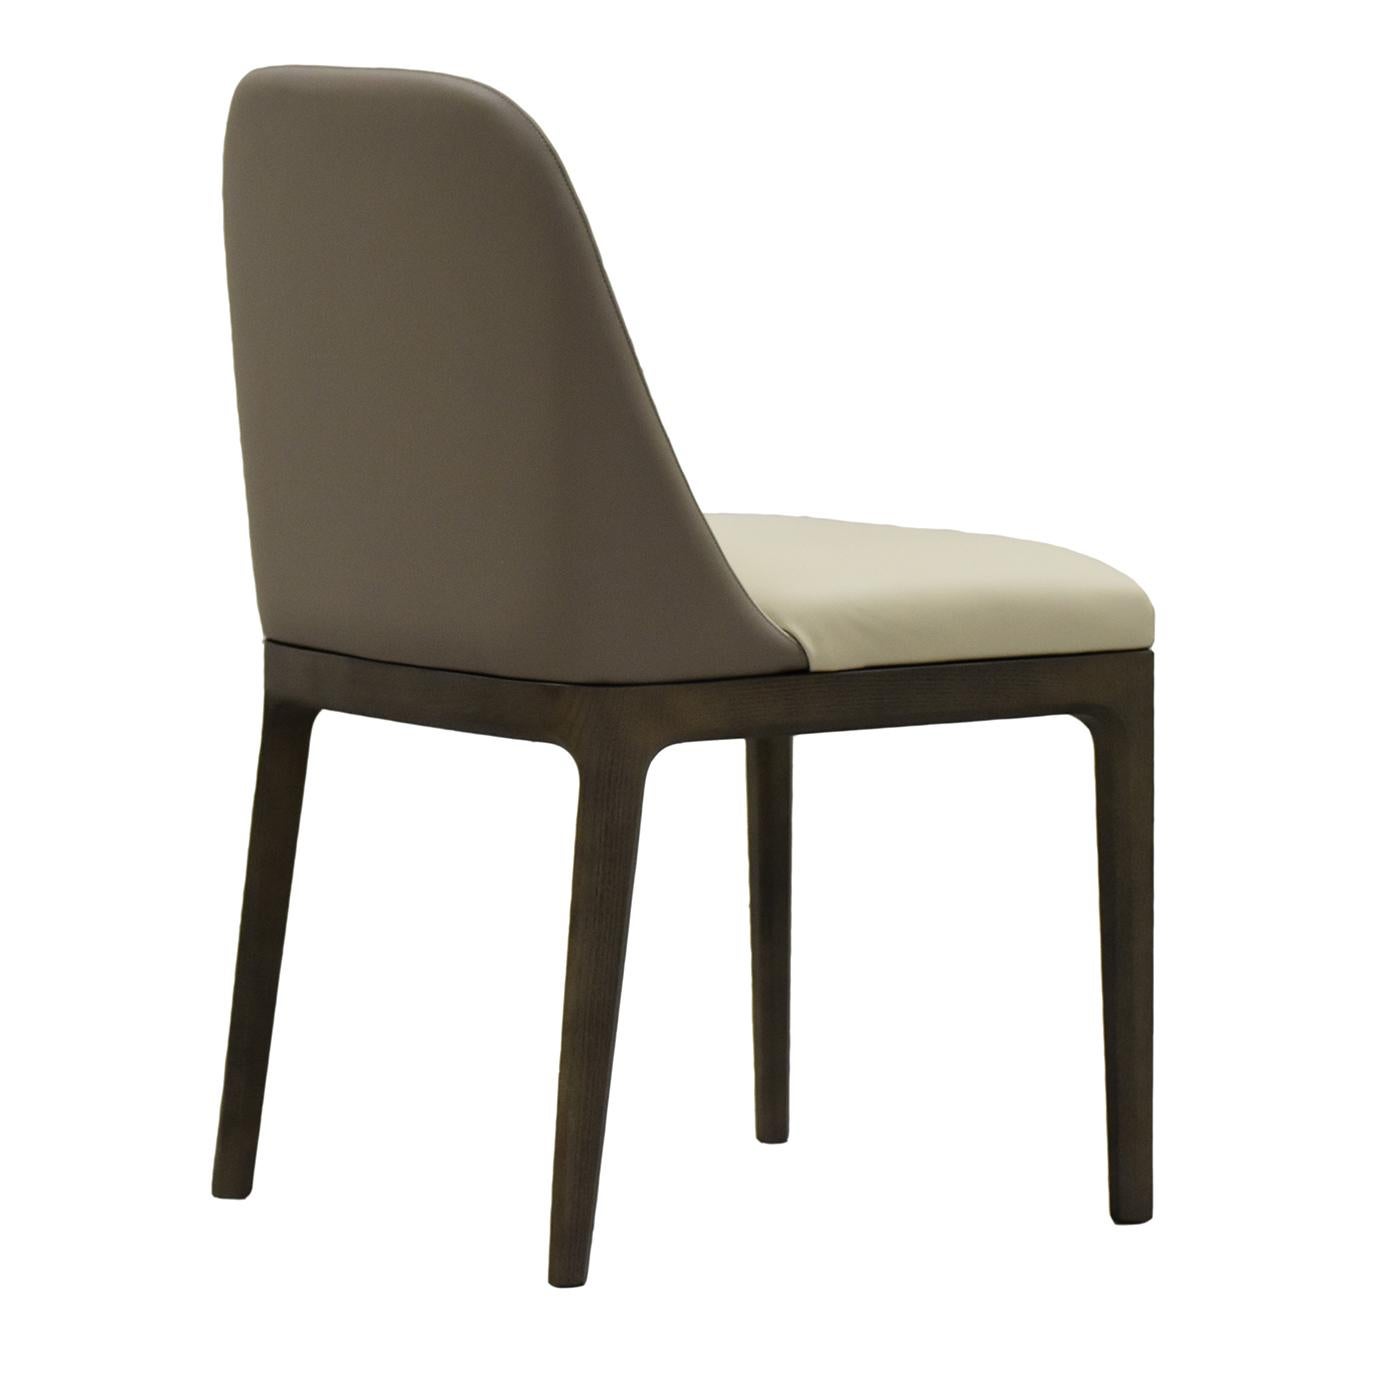 Boasting an essential and cozy silhouette, this elegant chair will be a statement-making piece in black-and-white decors. The padding of rounded seat and backrest renders this piece comfortable, while its white upholstery sets a stunning contrast